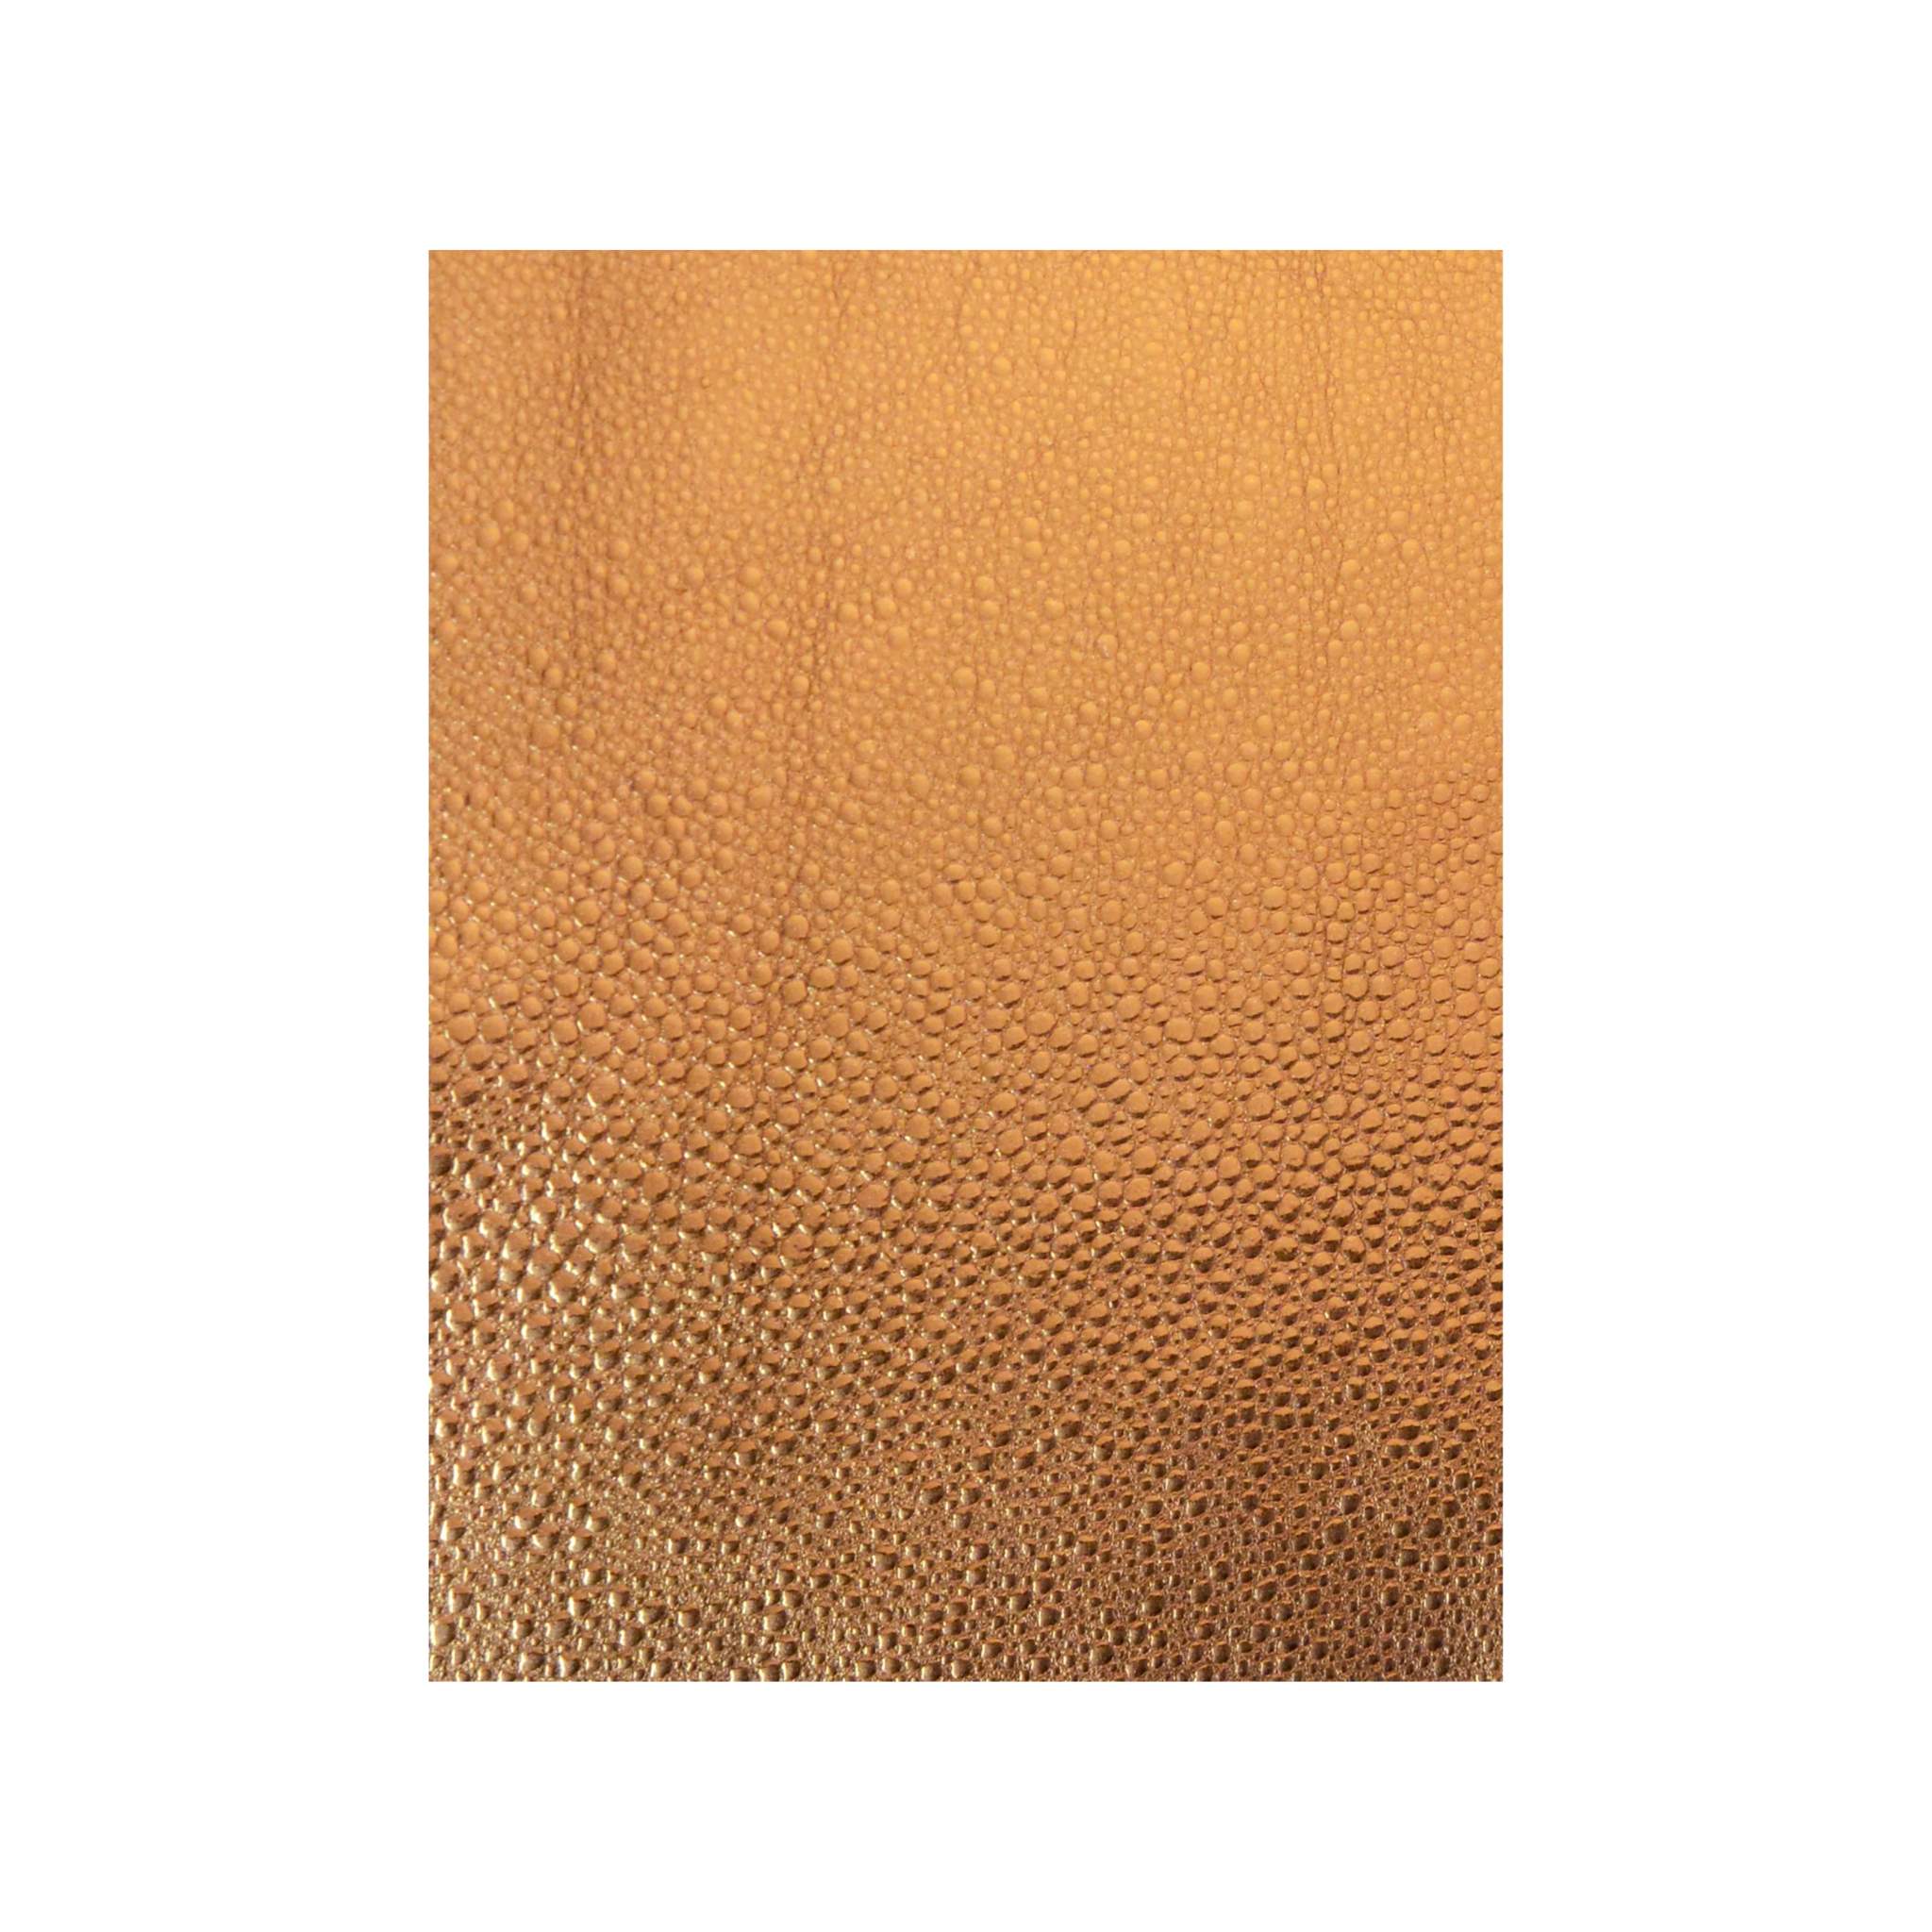 Pebble effect copper foil soft leather for sewing